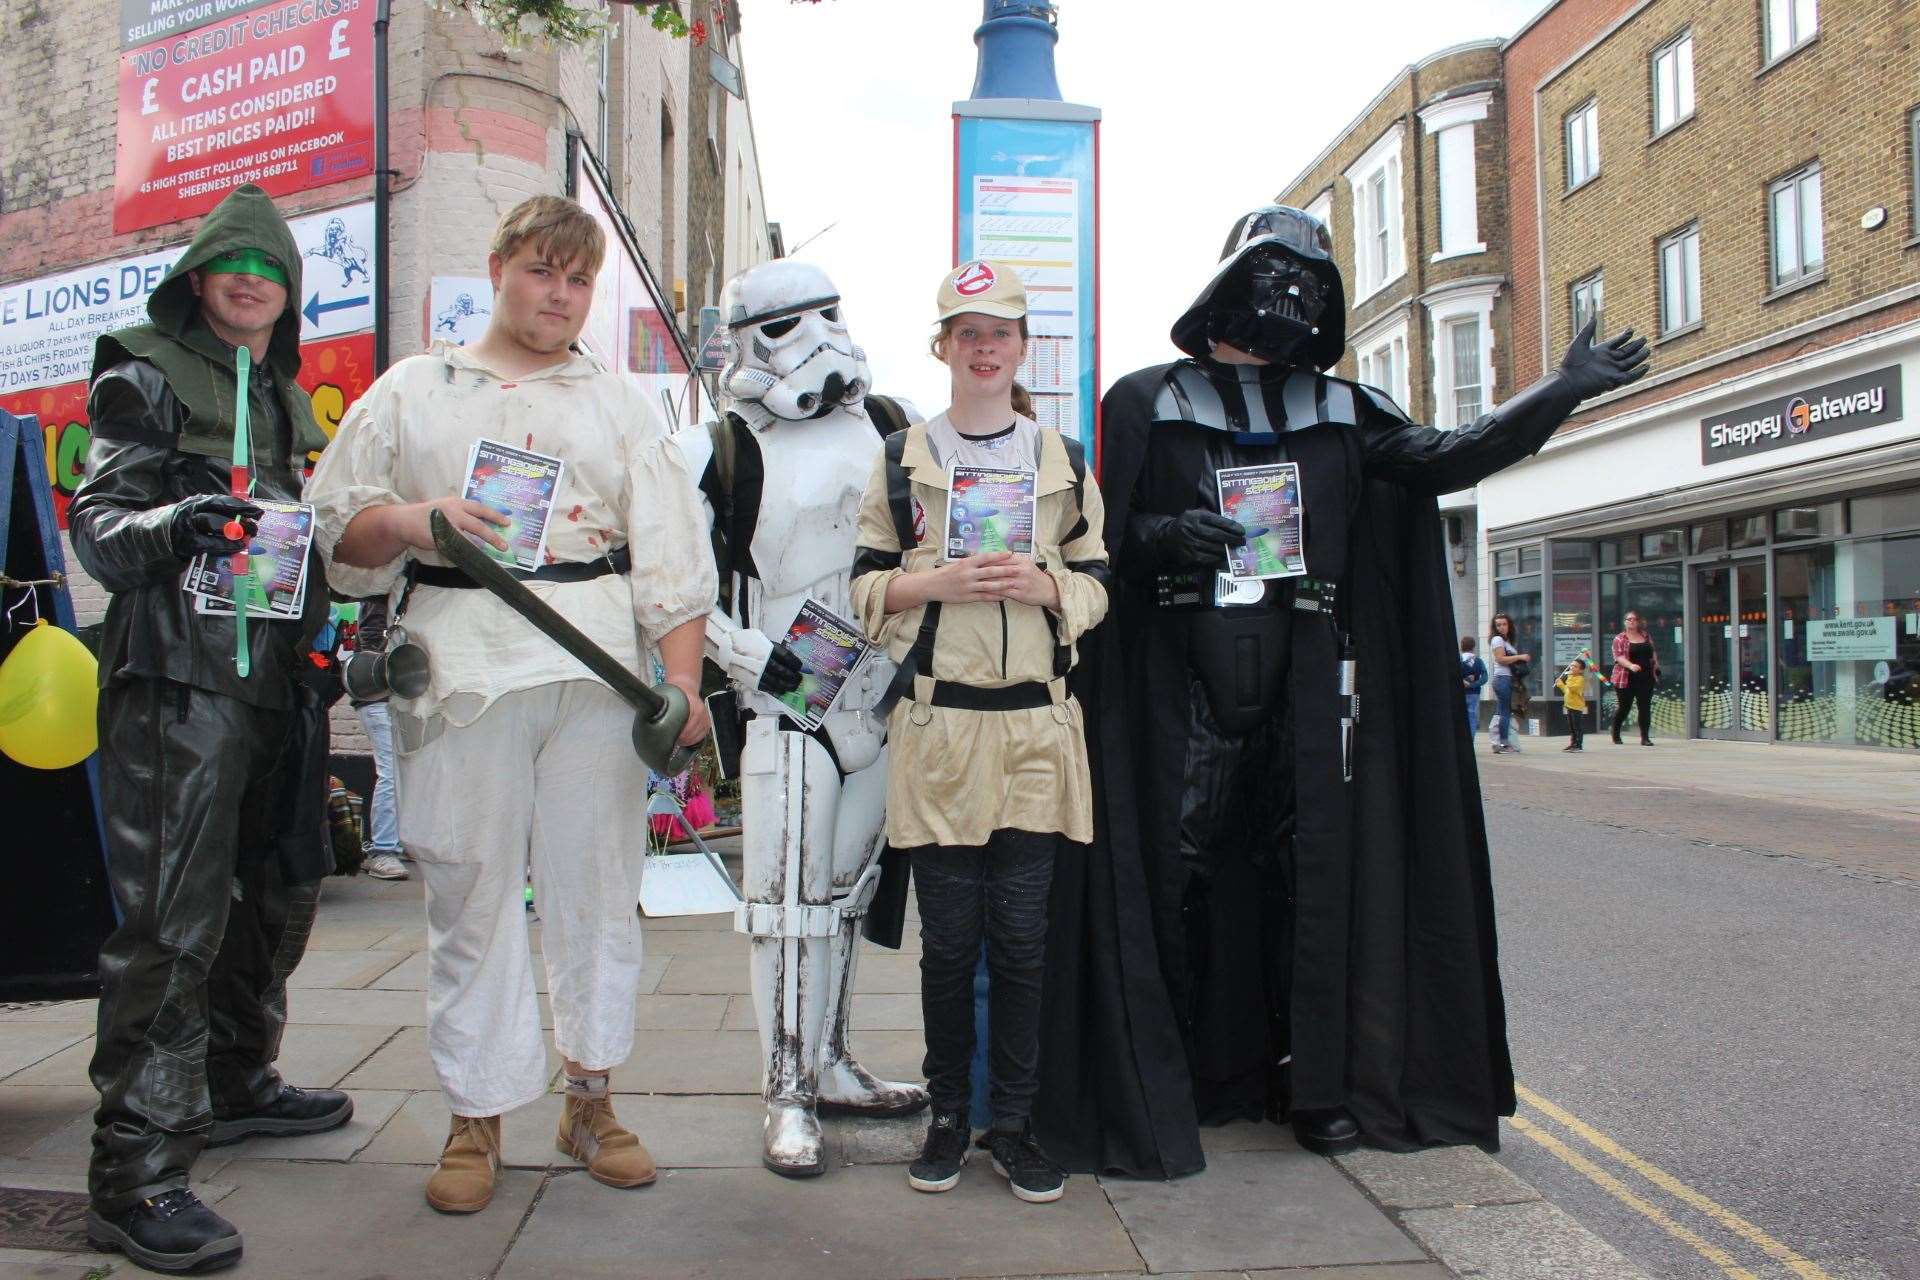 Darth Vader and his friends made an unexpected visit to the Sheppey Carnival in Sheerness High Street. Picture: John Nurden (15390932)